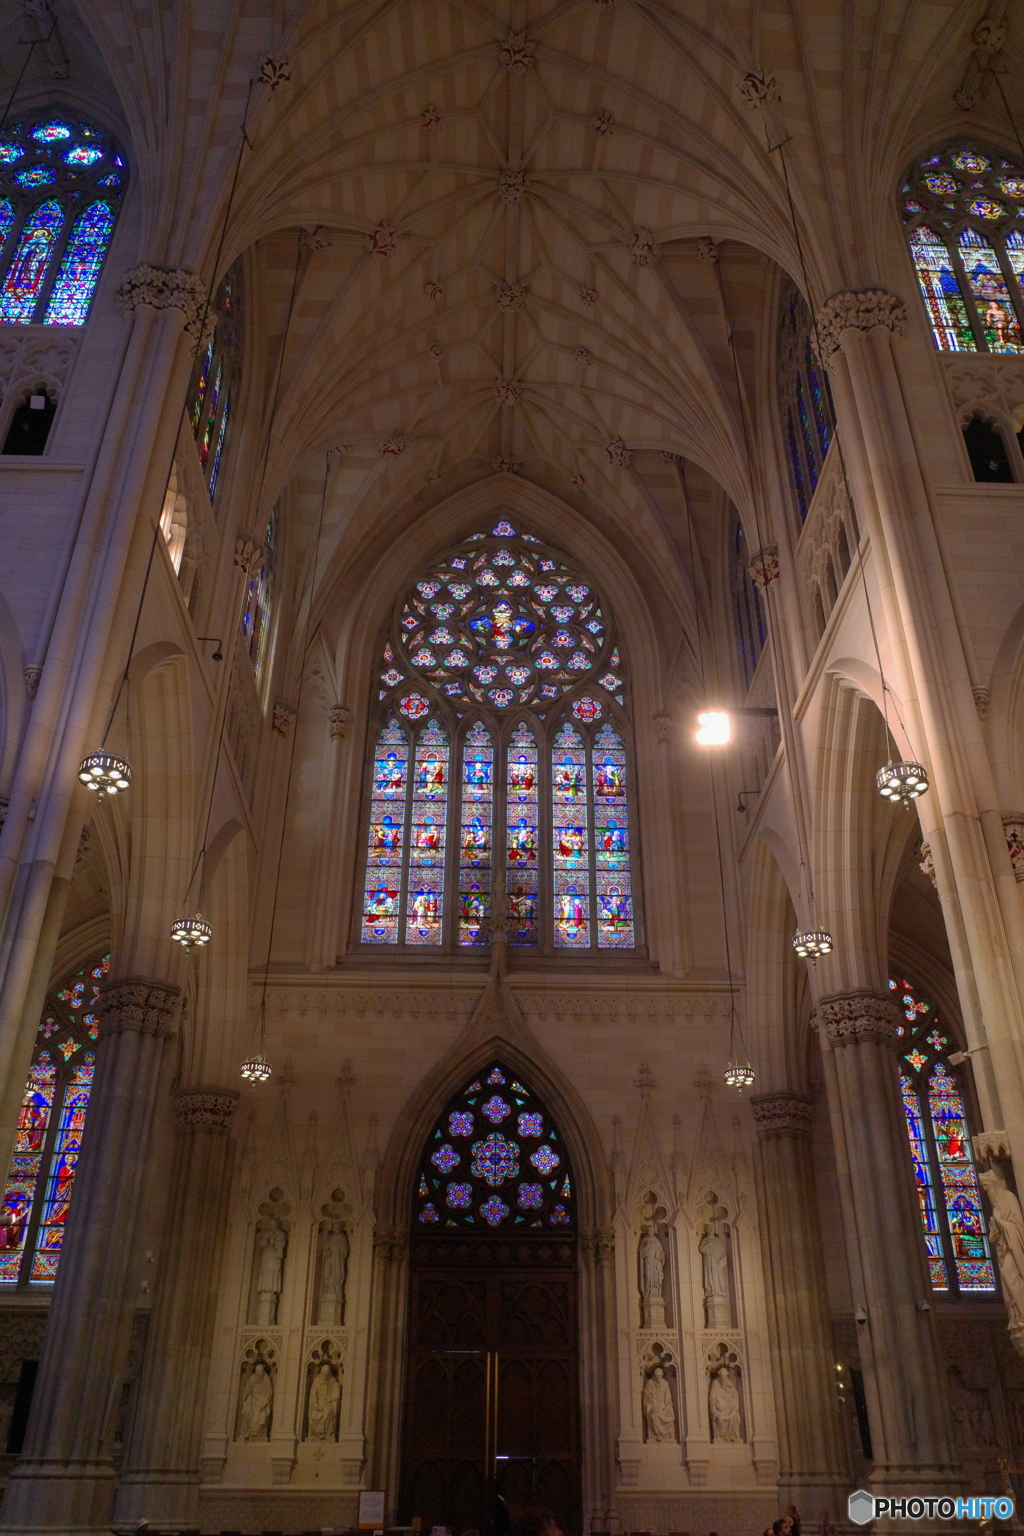 St. Patrick's Cathedral 3